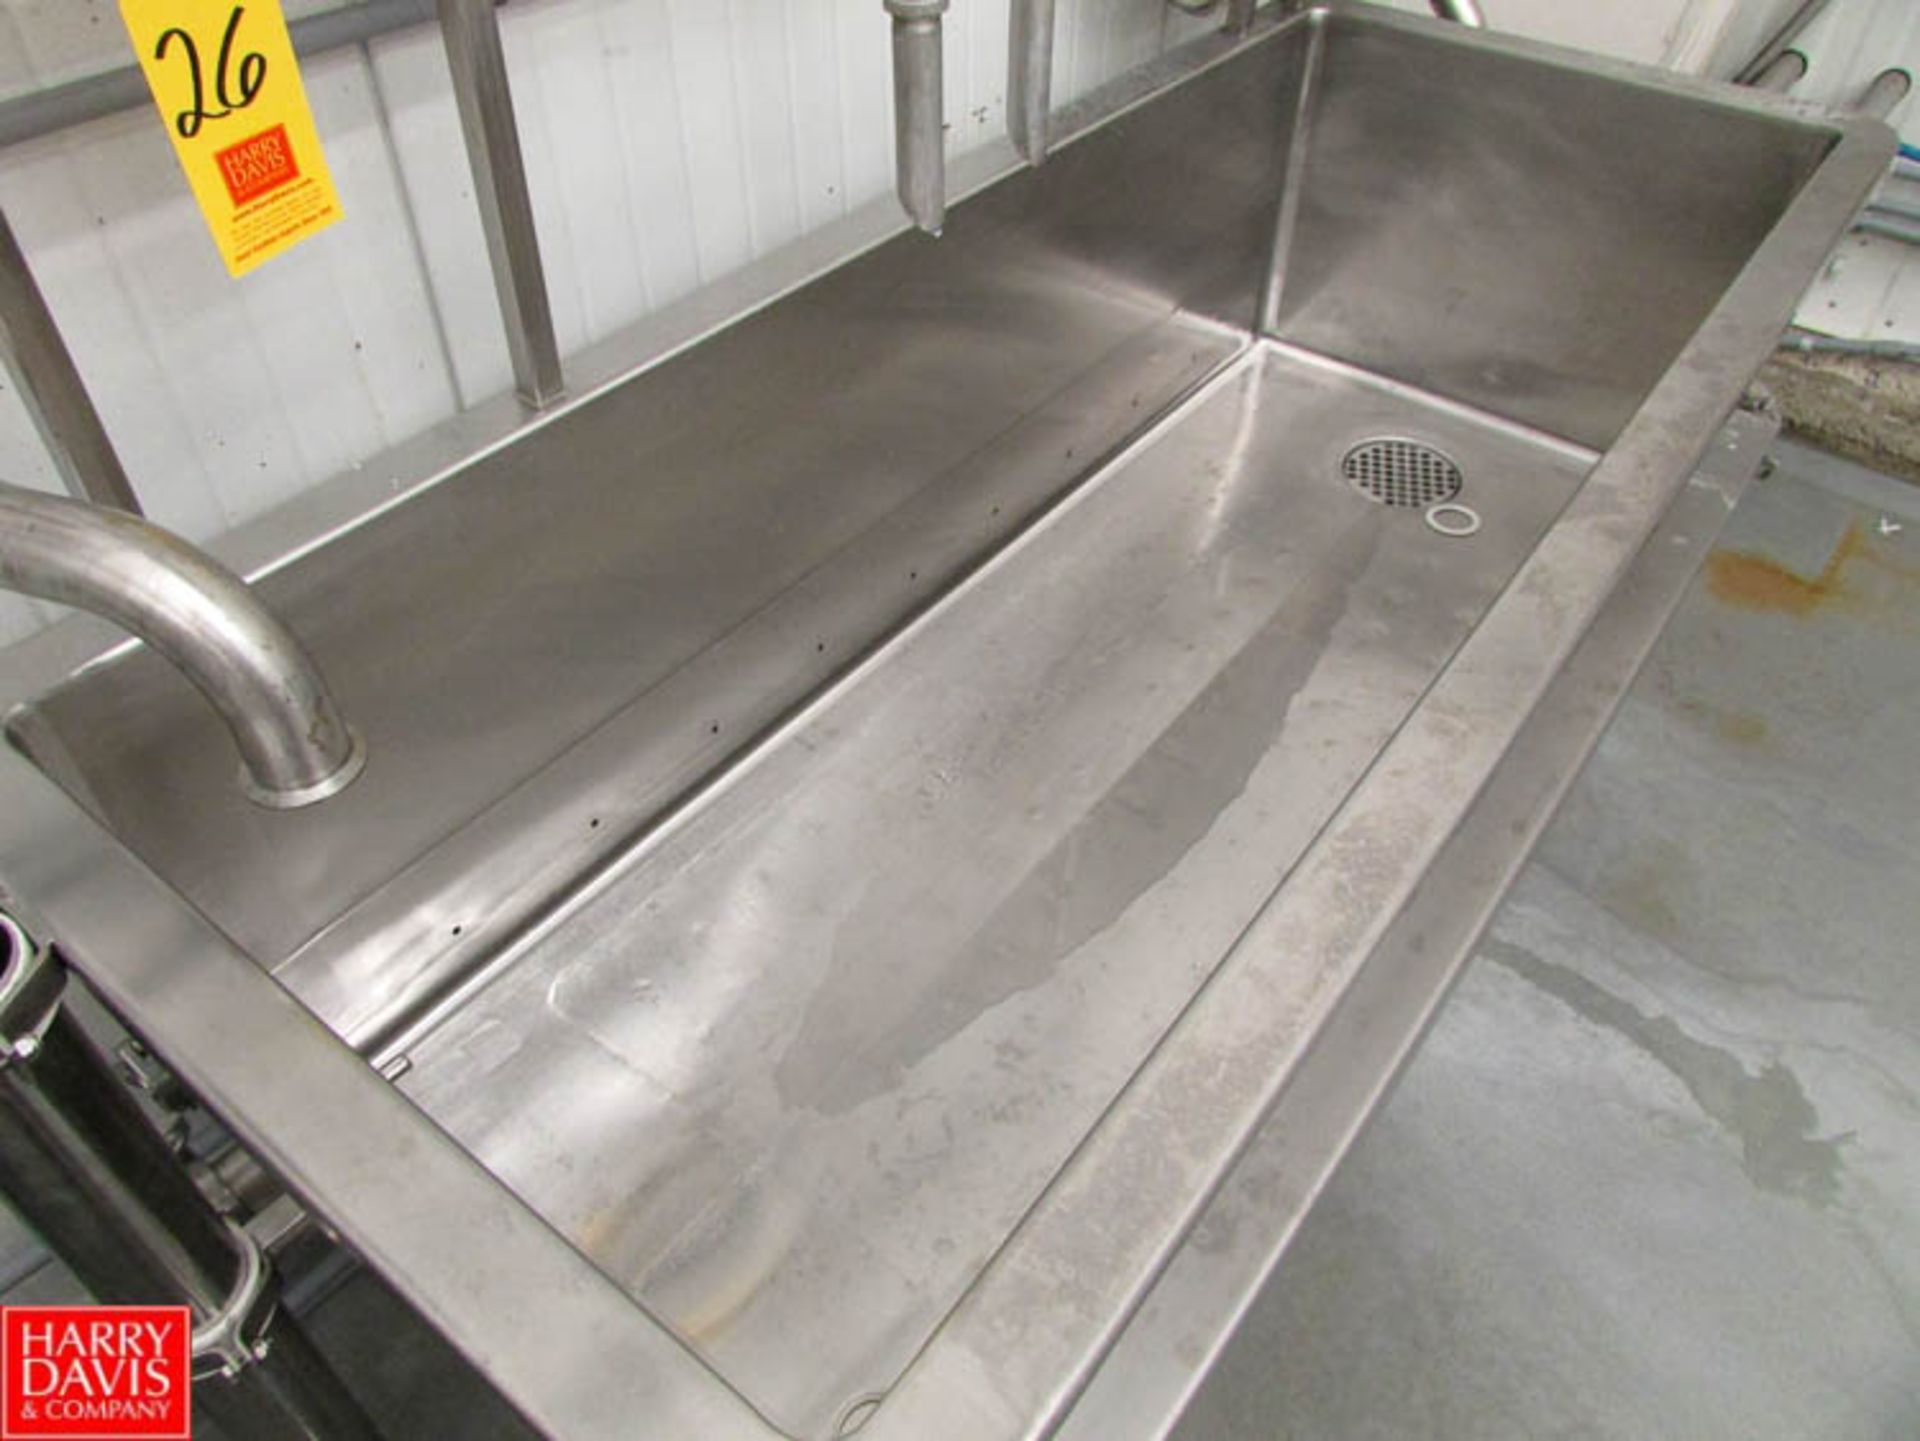 Dairy Heritage 100 Gallon S/S COP Trough, 64" x 24" x 18" with Ampco AC+216MD18T-S S/S Centrifugal - Image 2 of 4